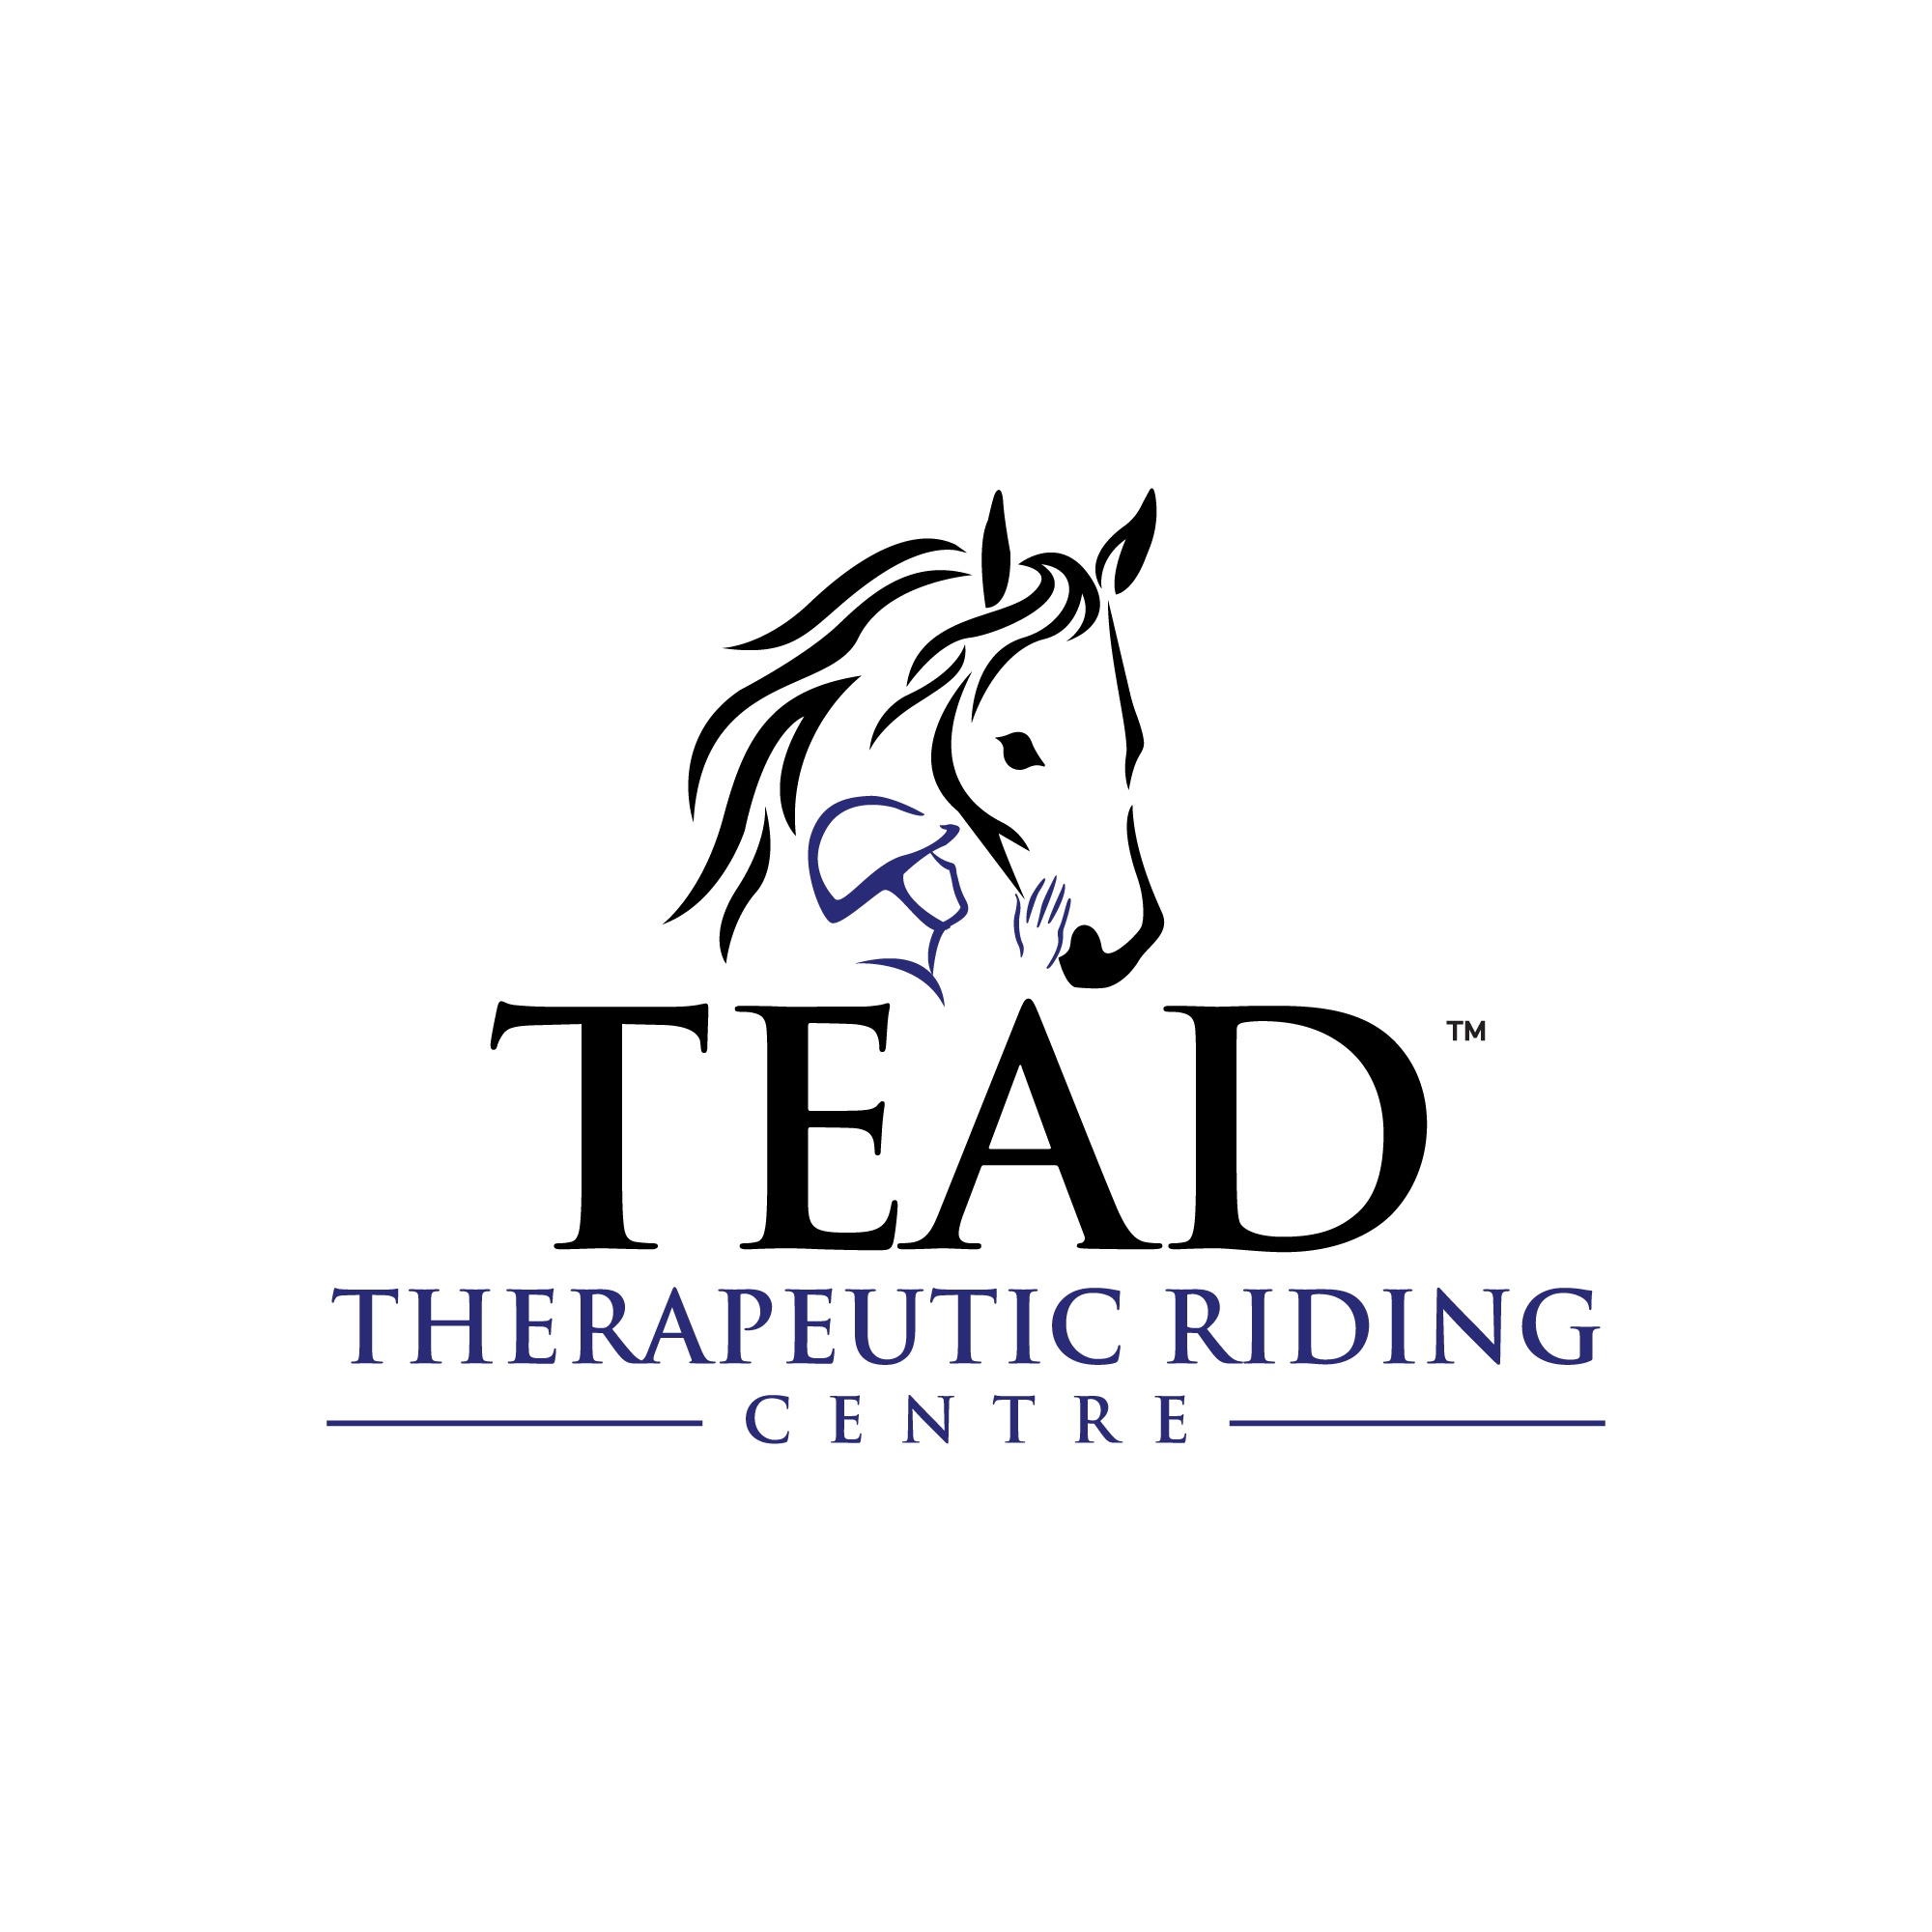 TEAD's new logo, featuring the silhouettes of a participant and a horse.